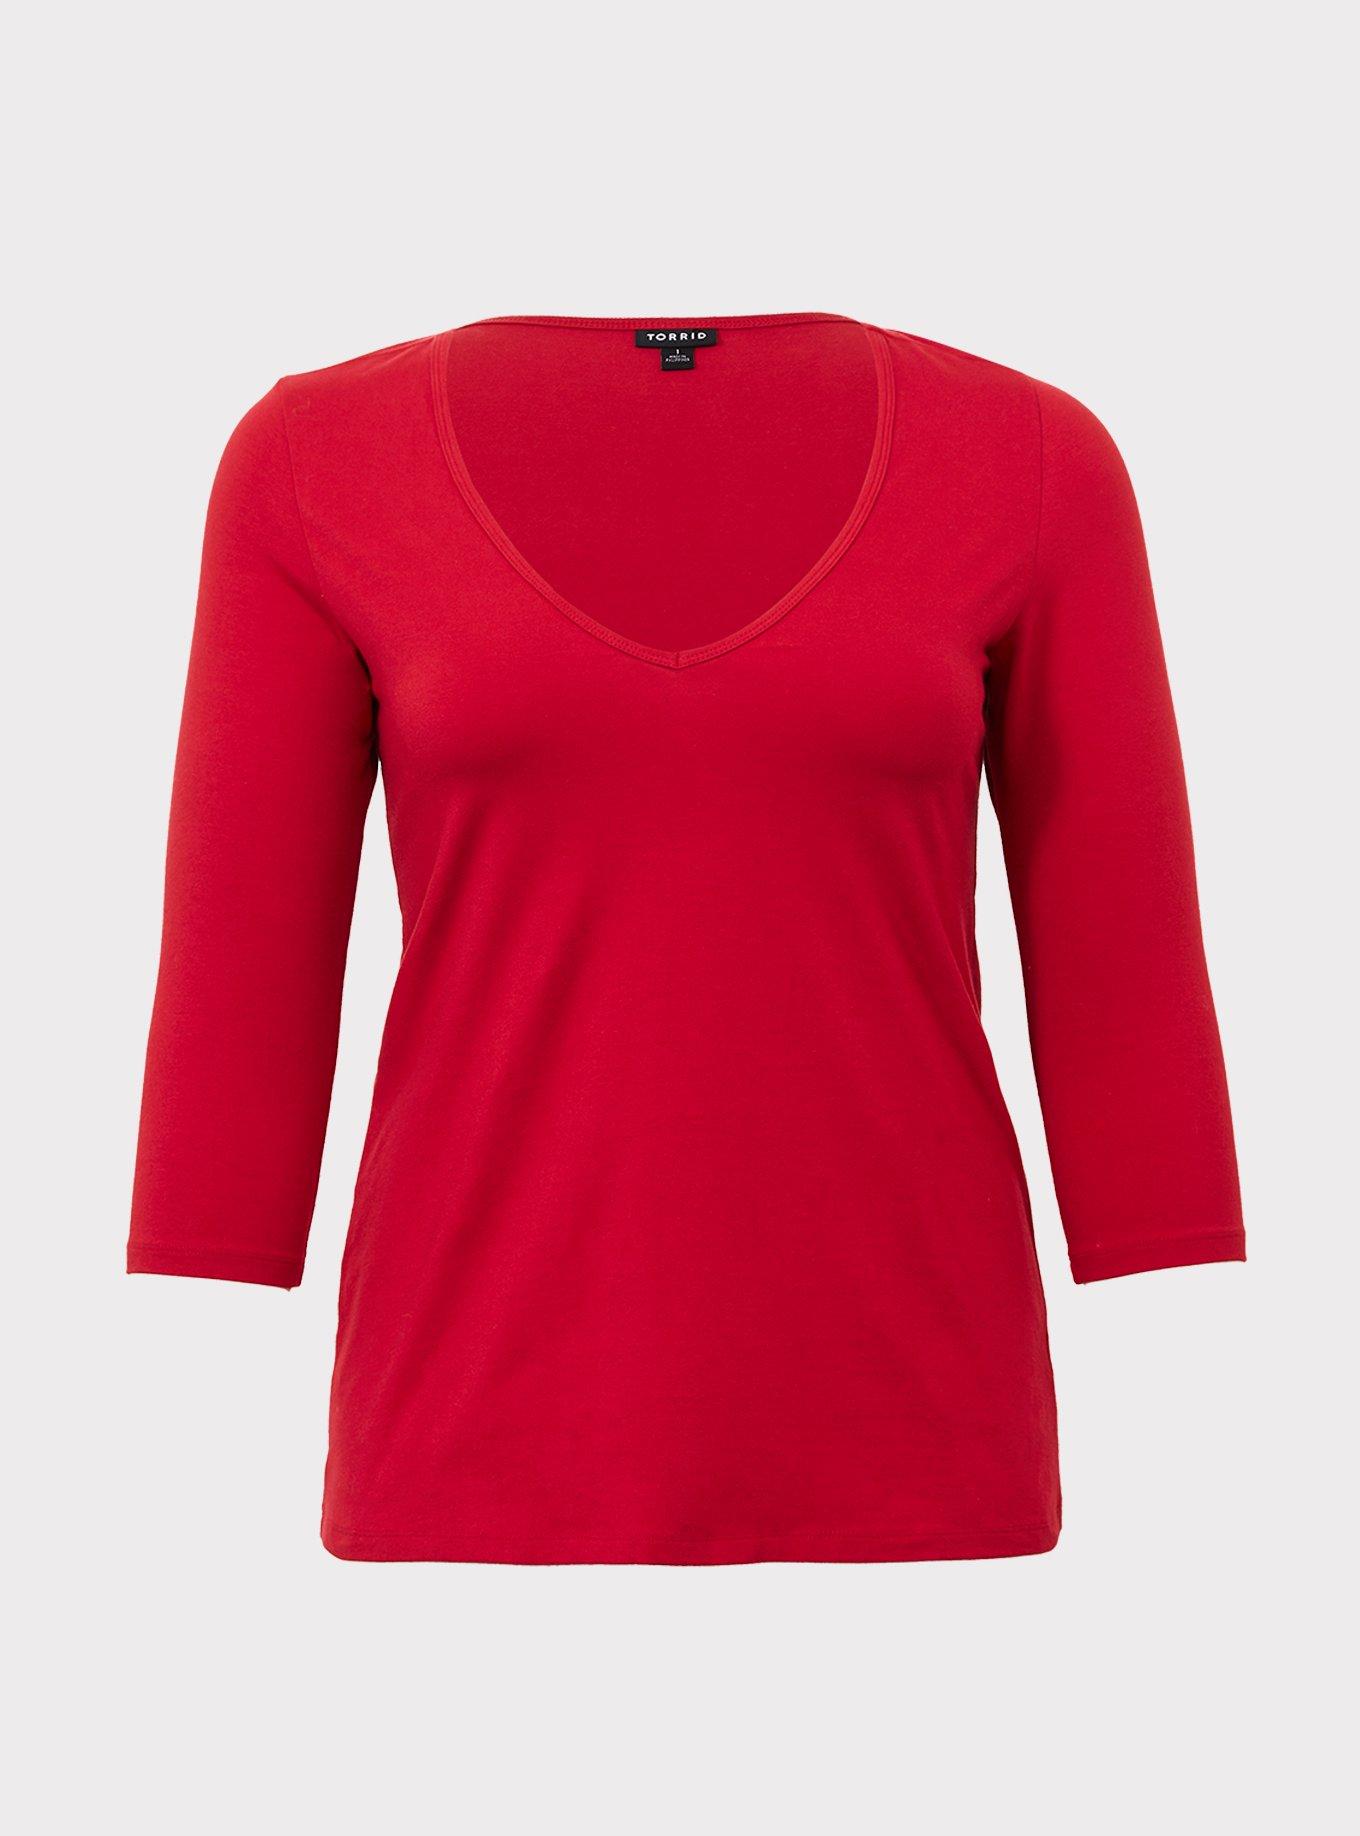 Plus Size - Red V-Neck Foxy Tee - Torrid